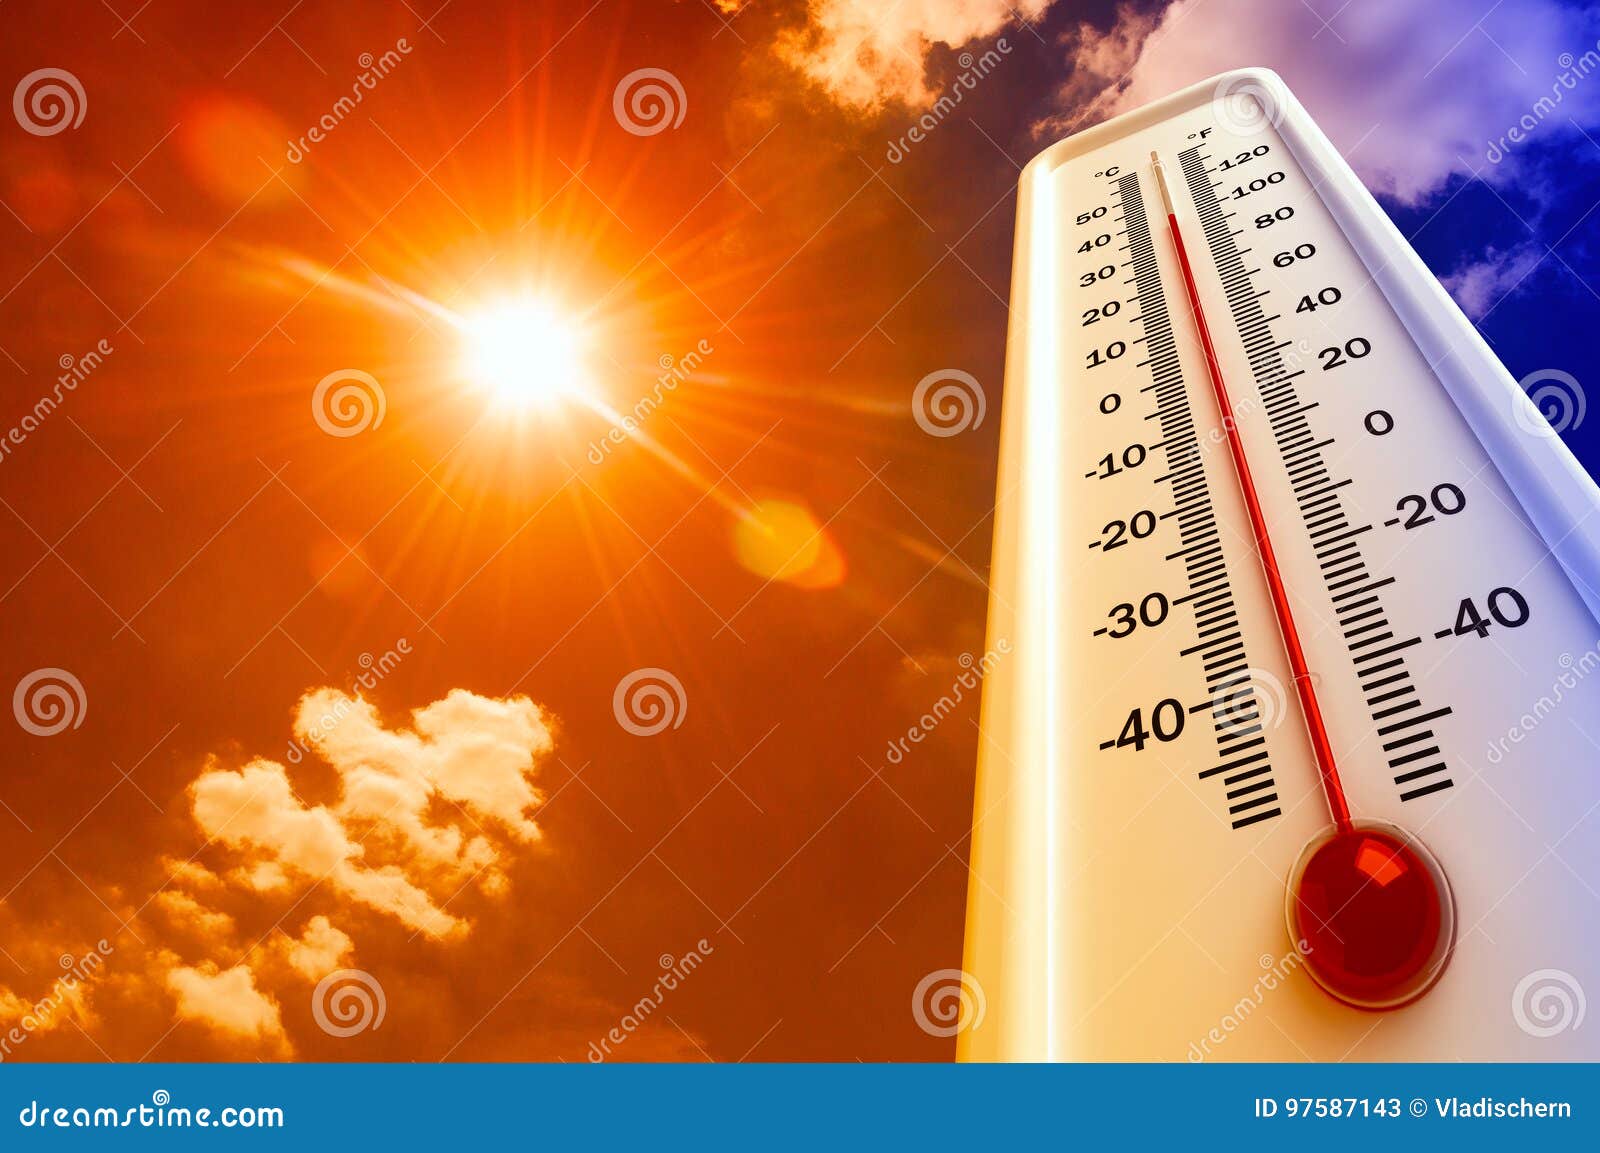 heat, thermometer shows the temperature is hot in the sky, summer